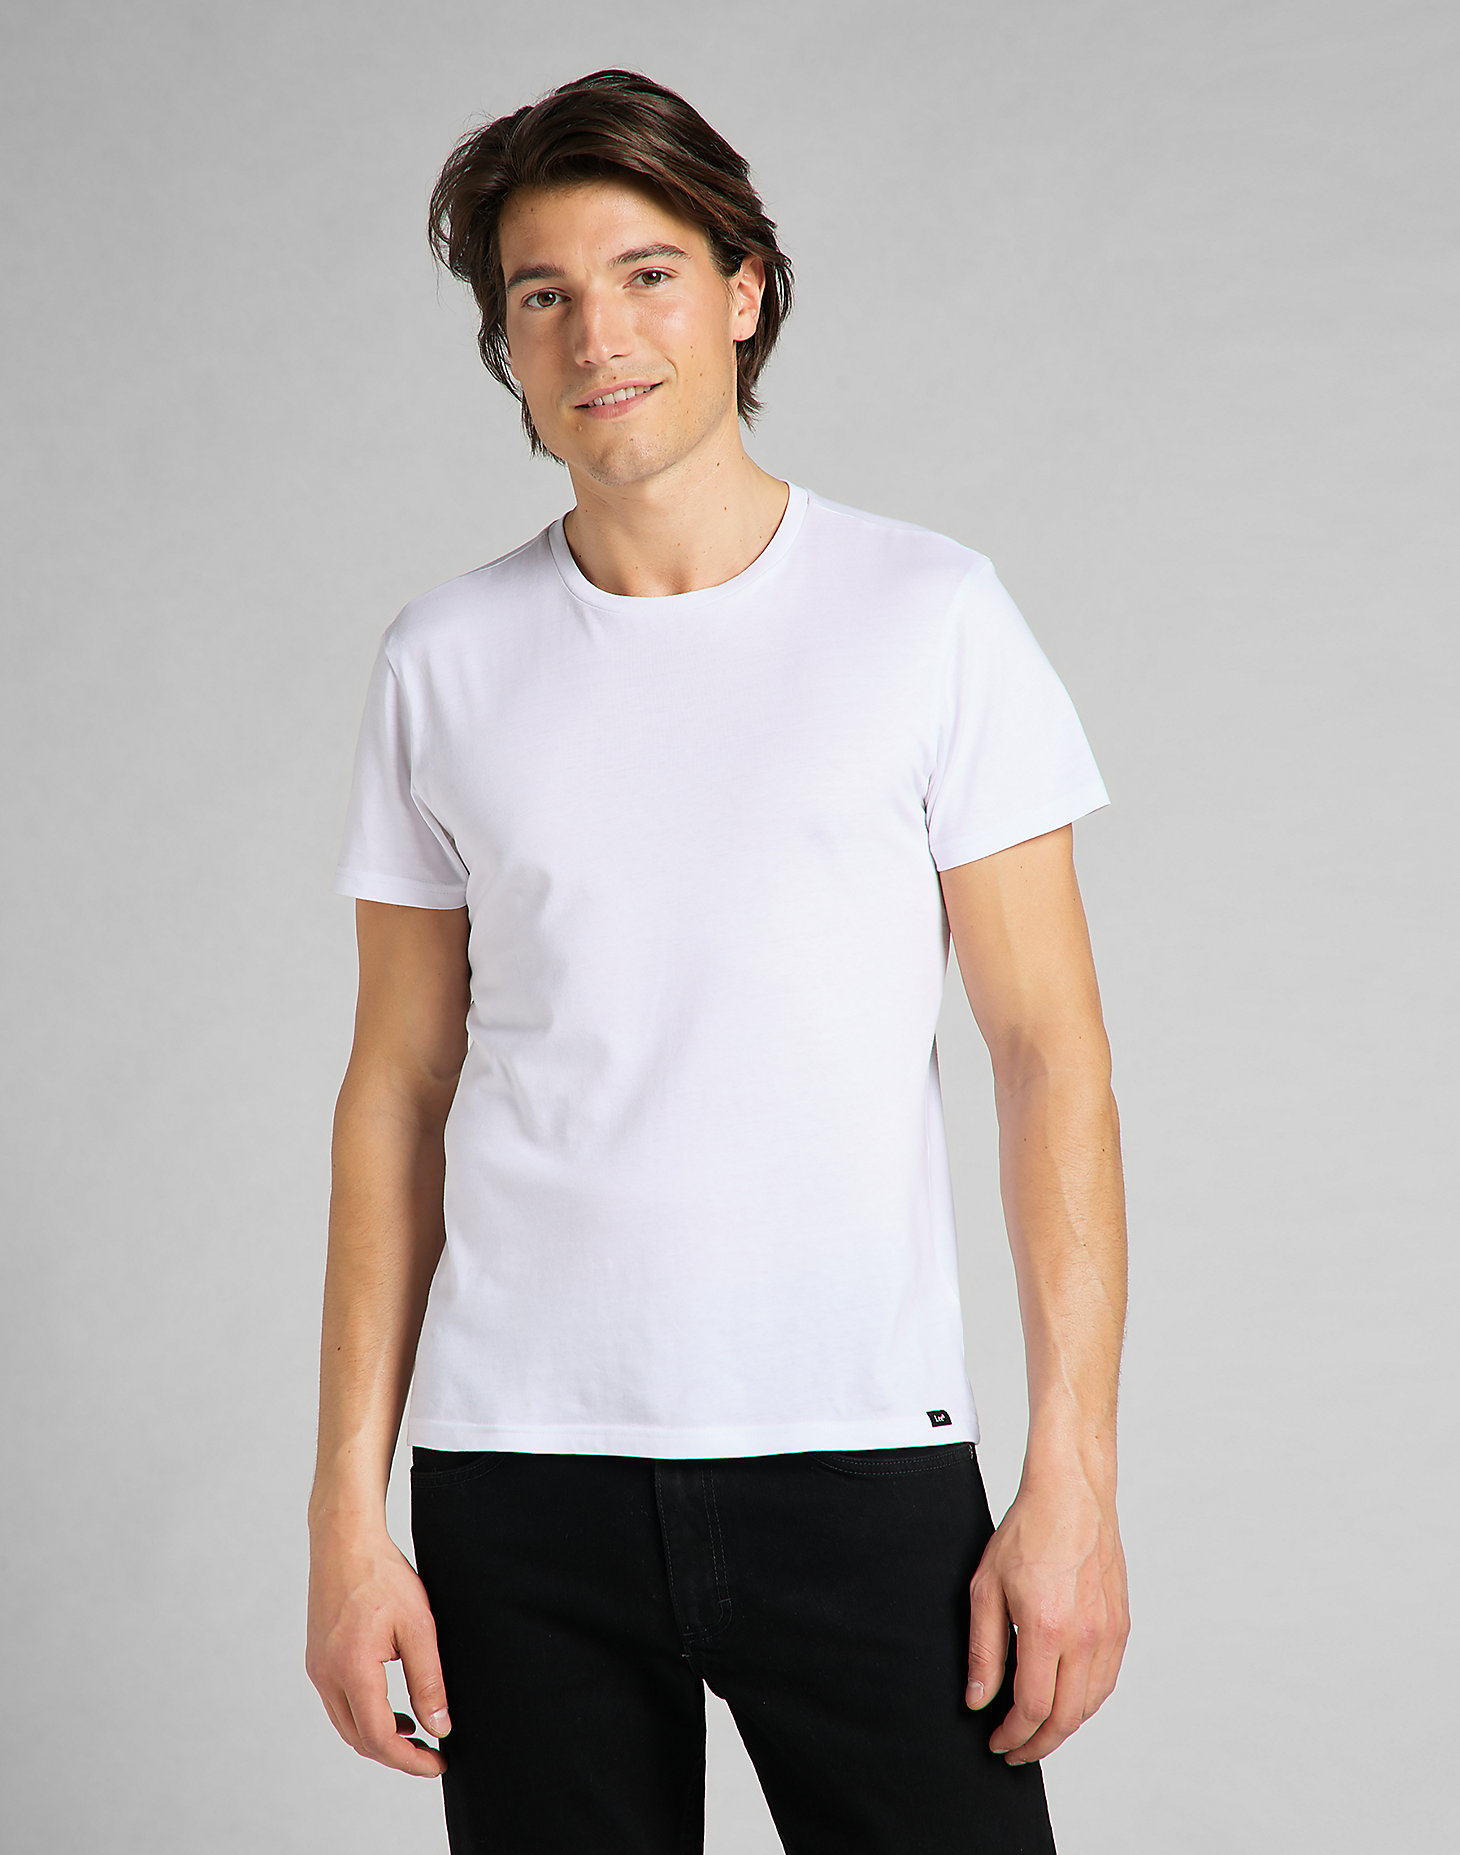 Twin Pack Crew Tee in White alternative view 1